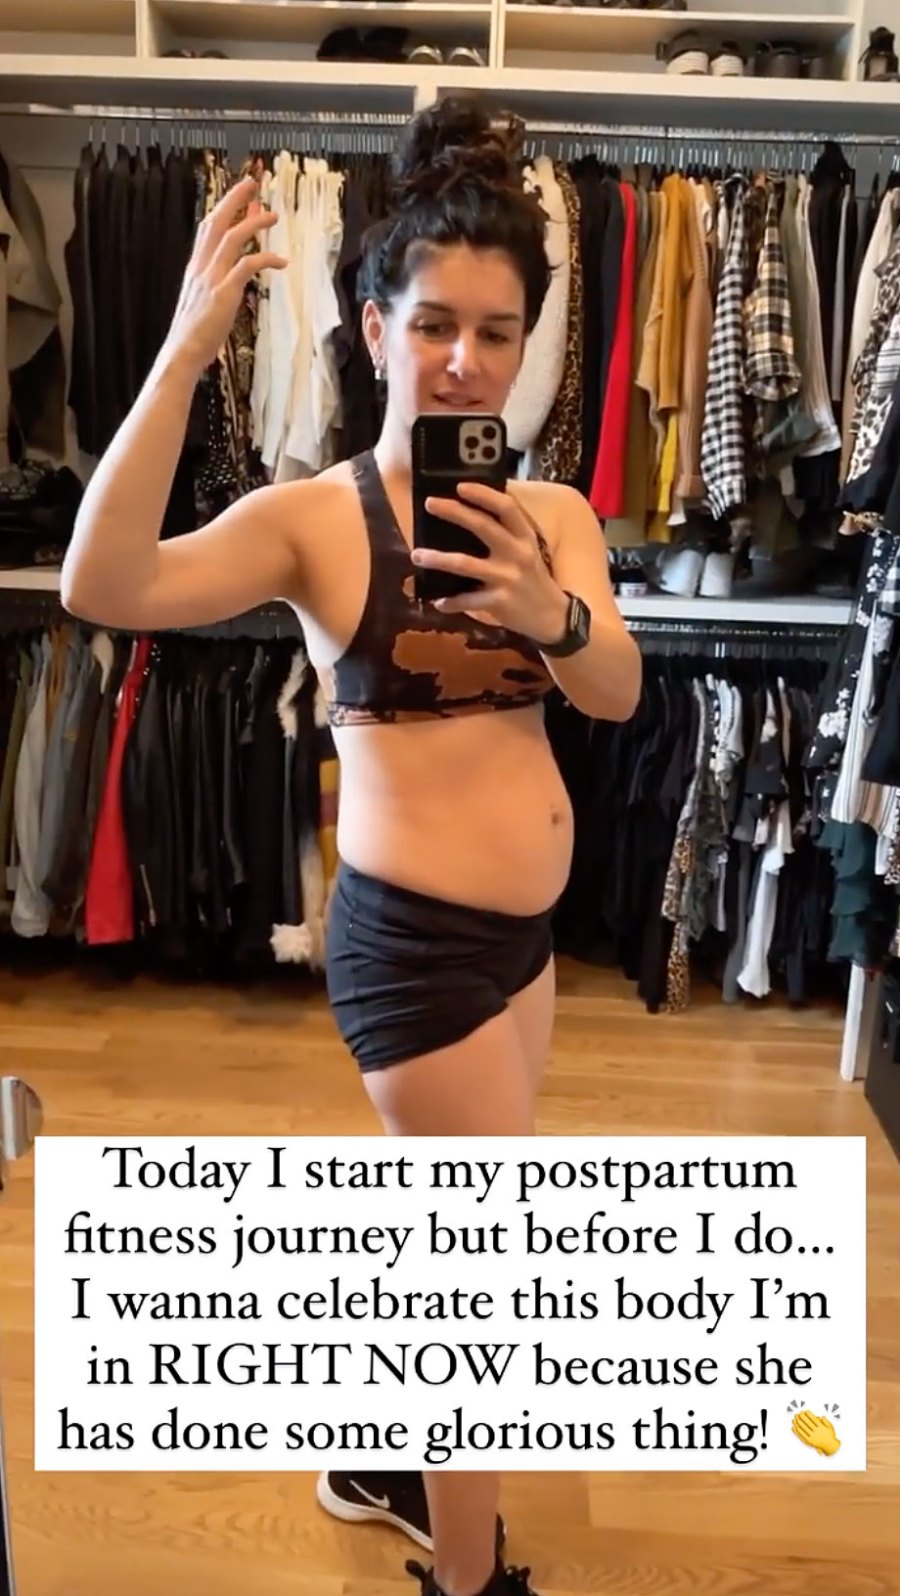 The craziness of trying to “get back in shape” after a baby – A Good Life